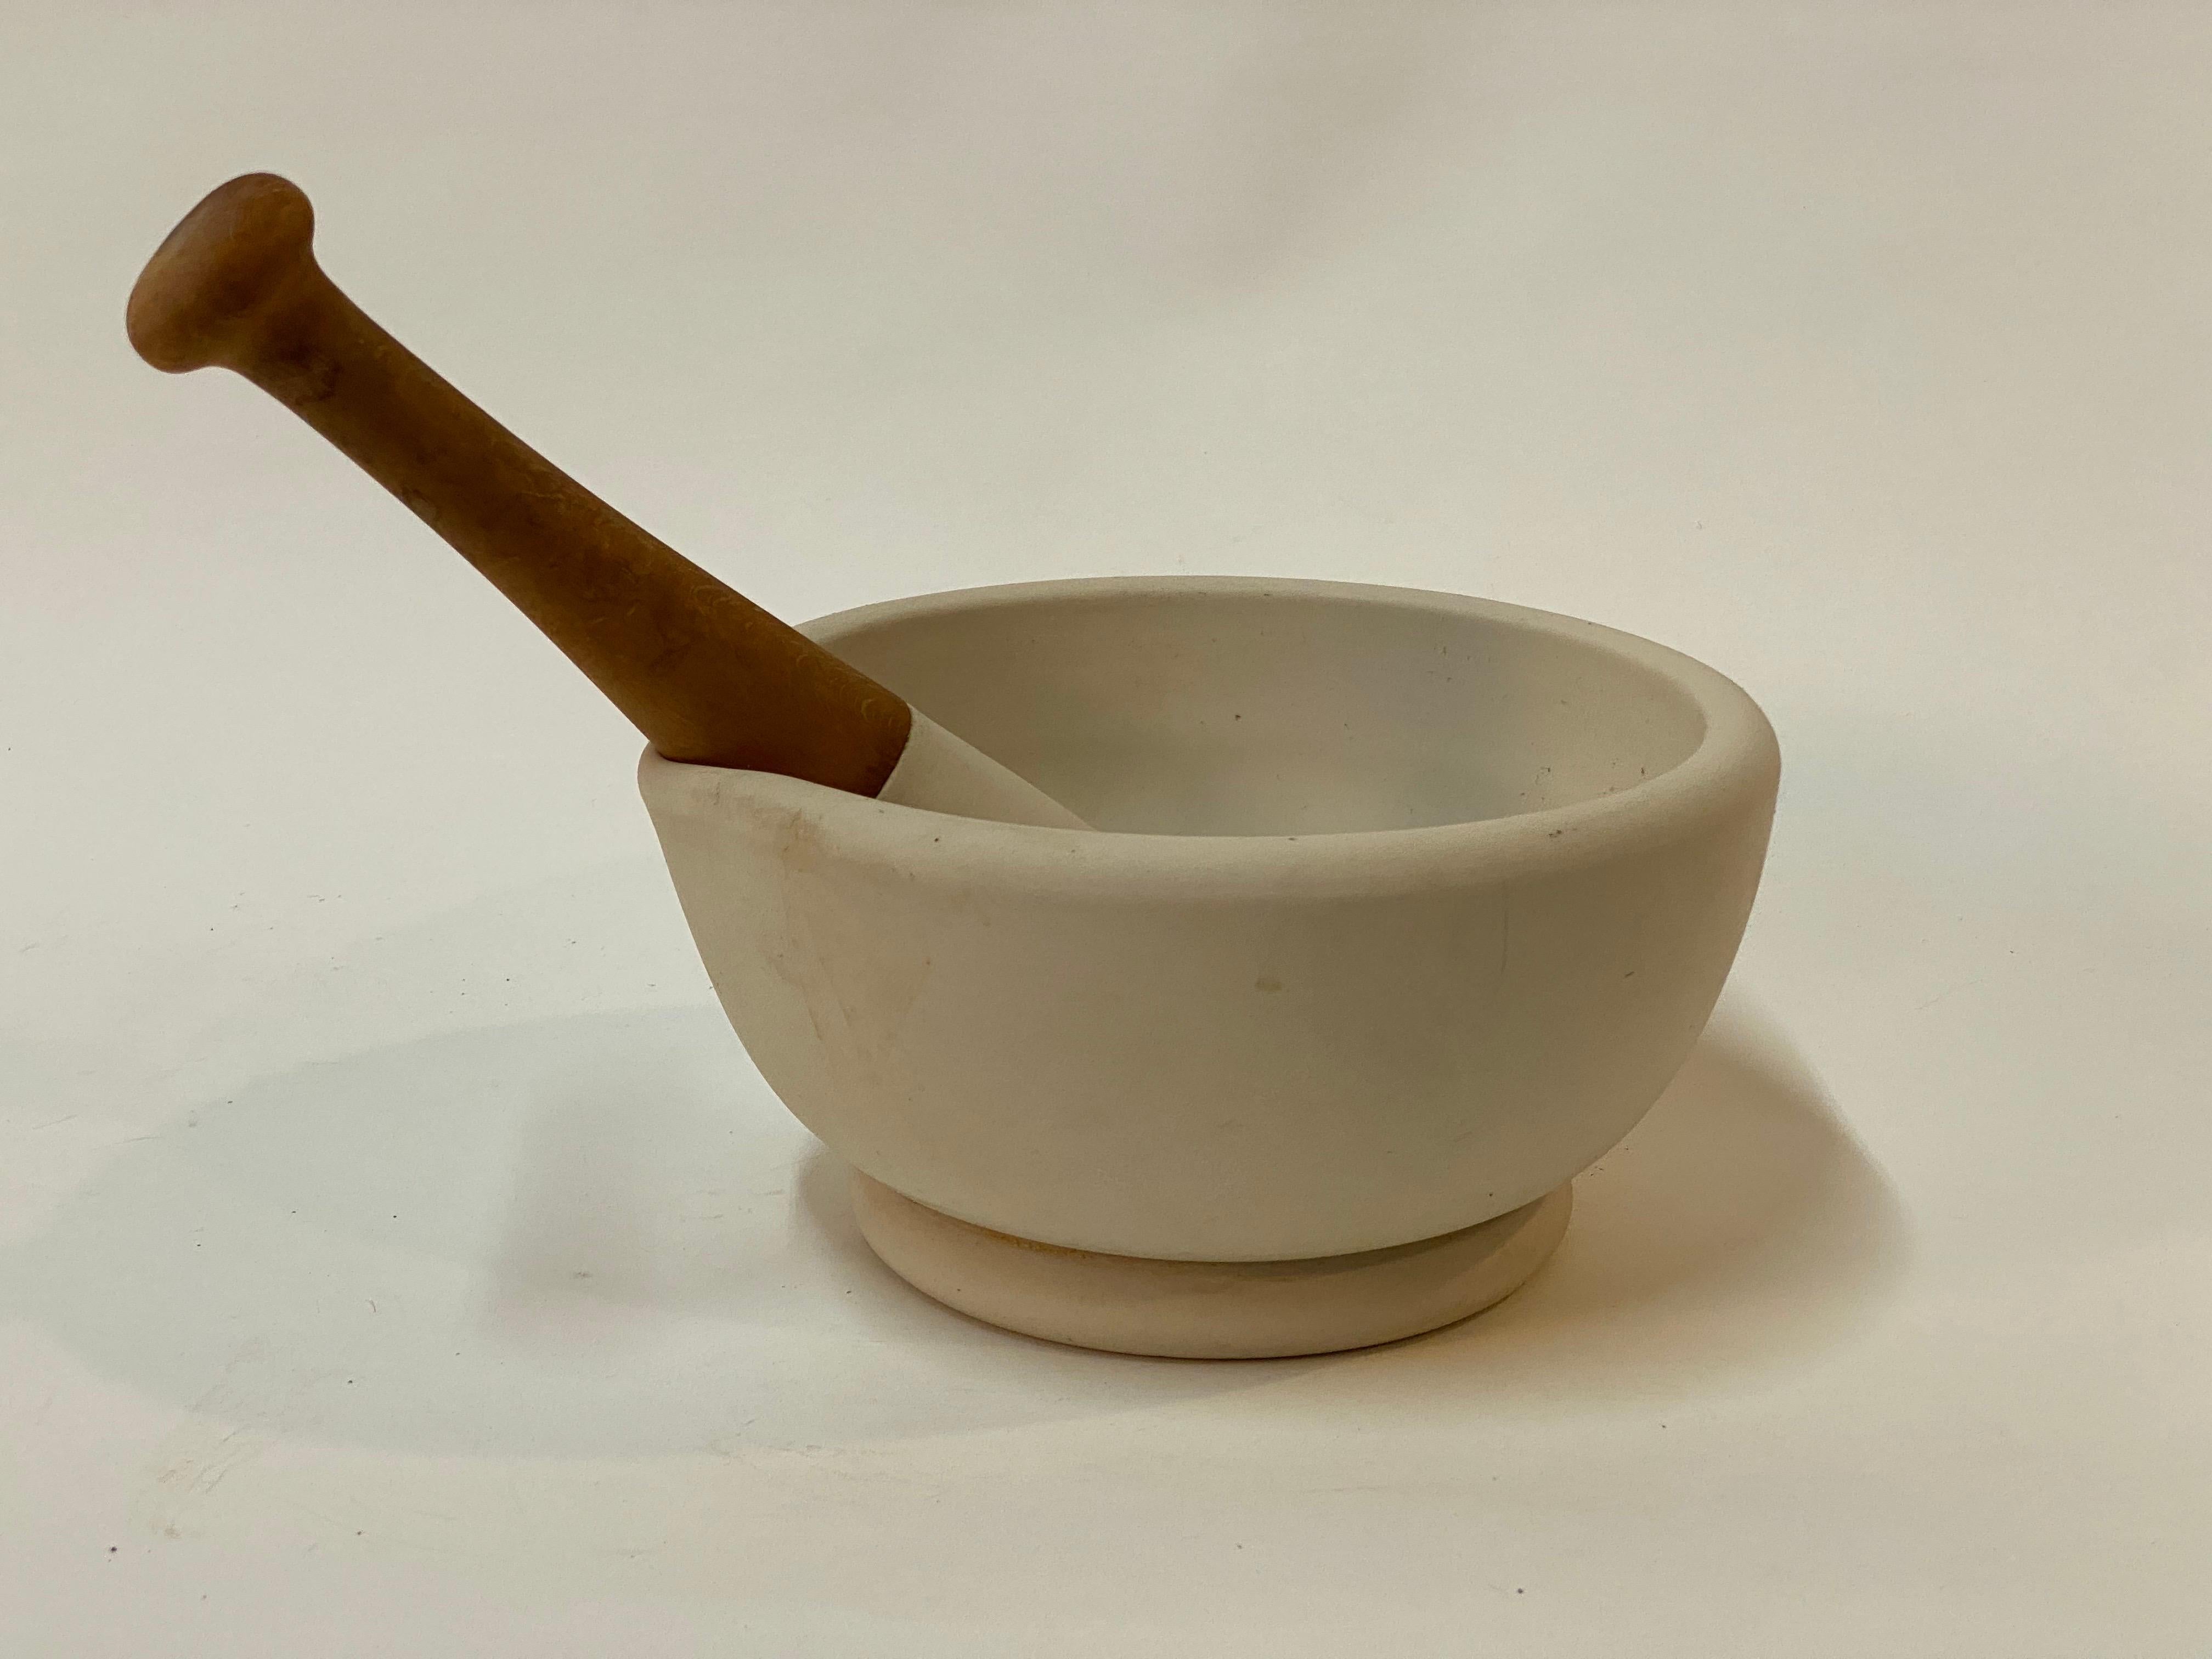 Porcelain mortar and pestle. Signed on the underside with the size #7, Acid Proof, Made in England. Wood handled pestle. Great for use in the kitchen, artist's studio or office. It doesn't matter whether you're grinding spices and herbs or artist's